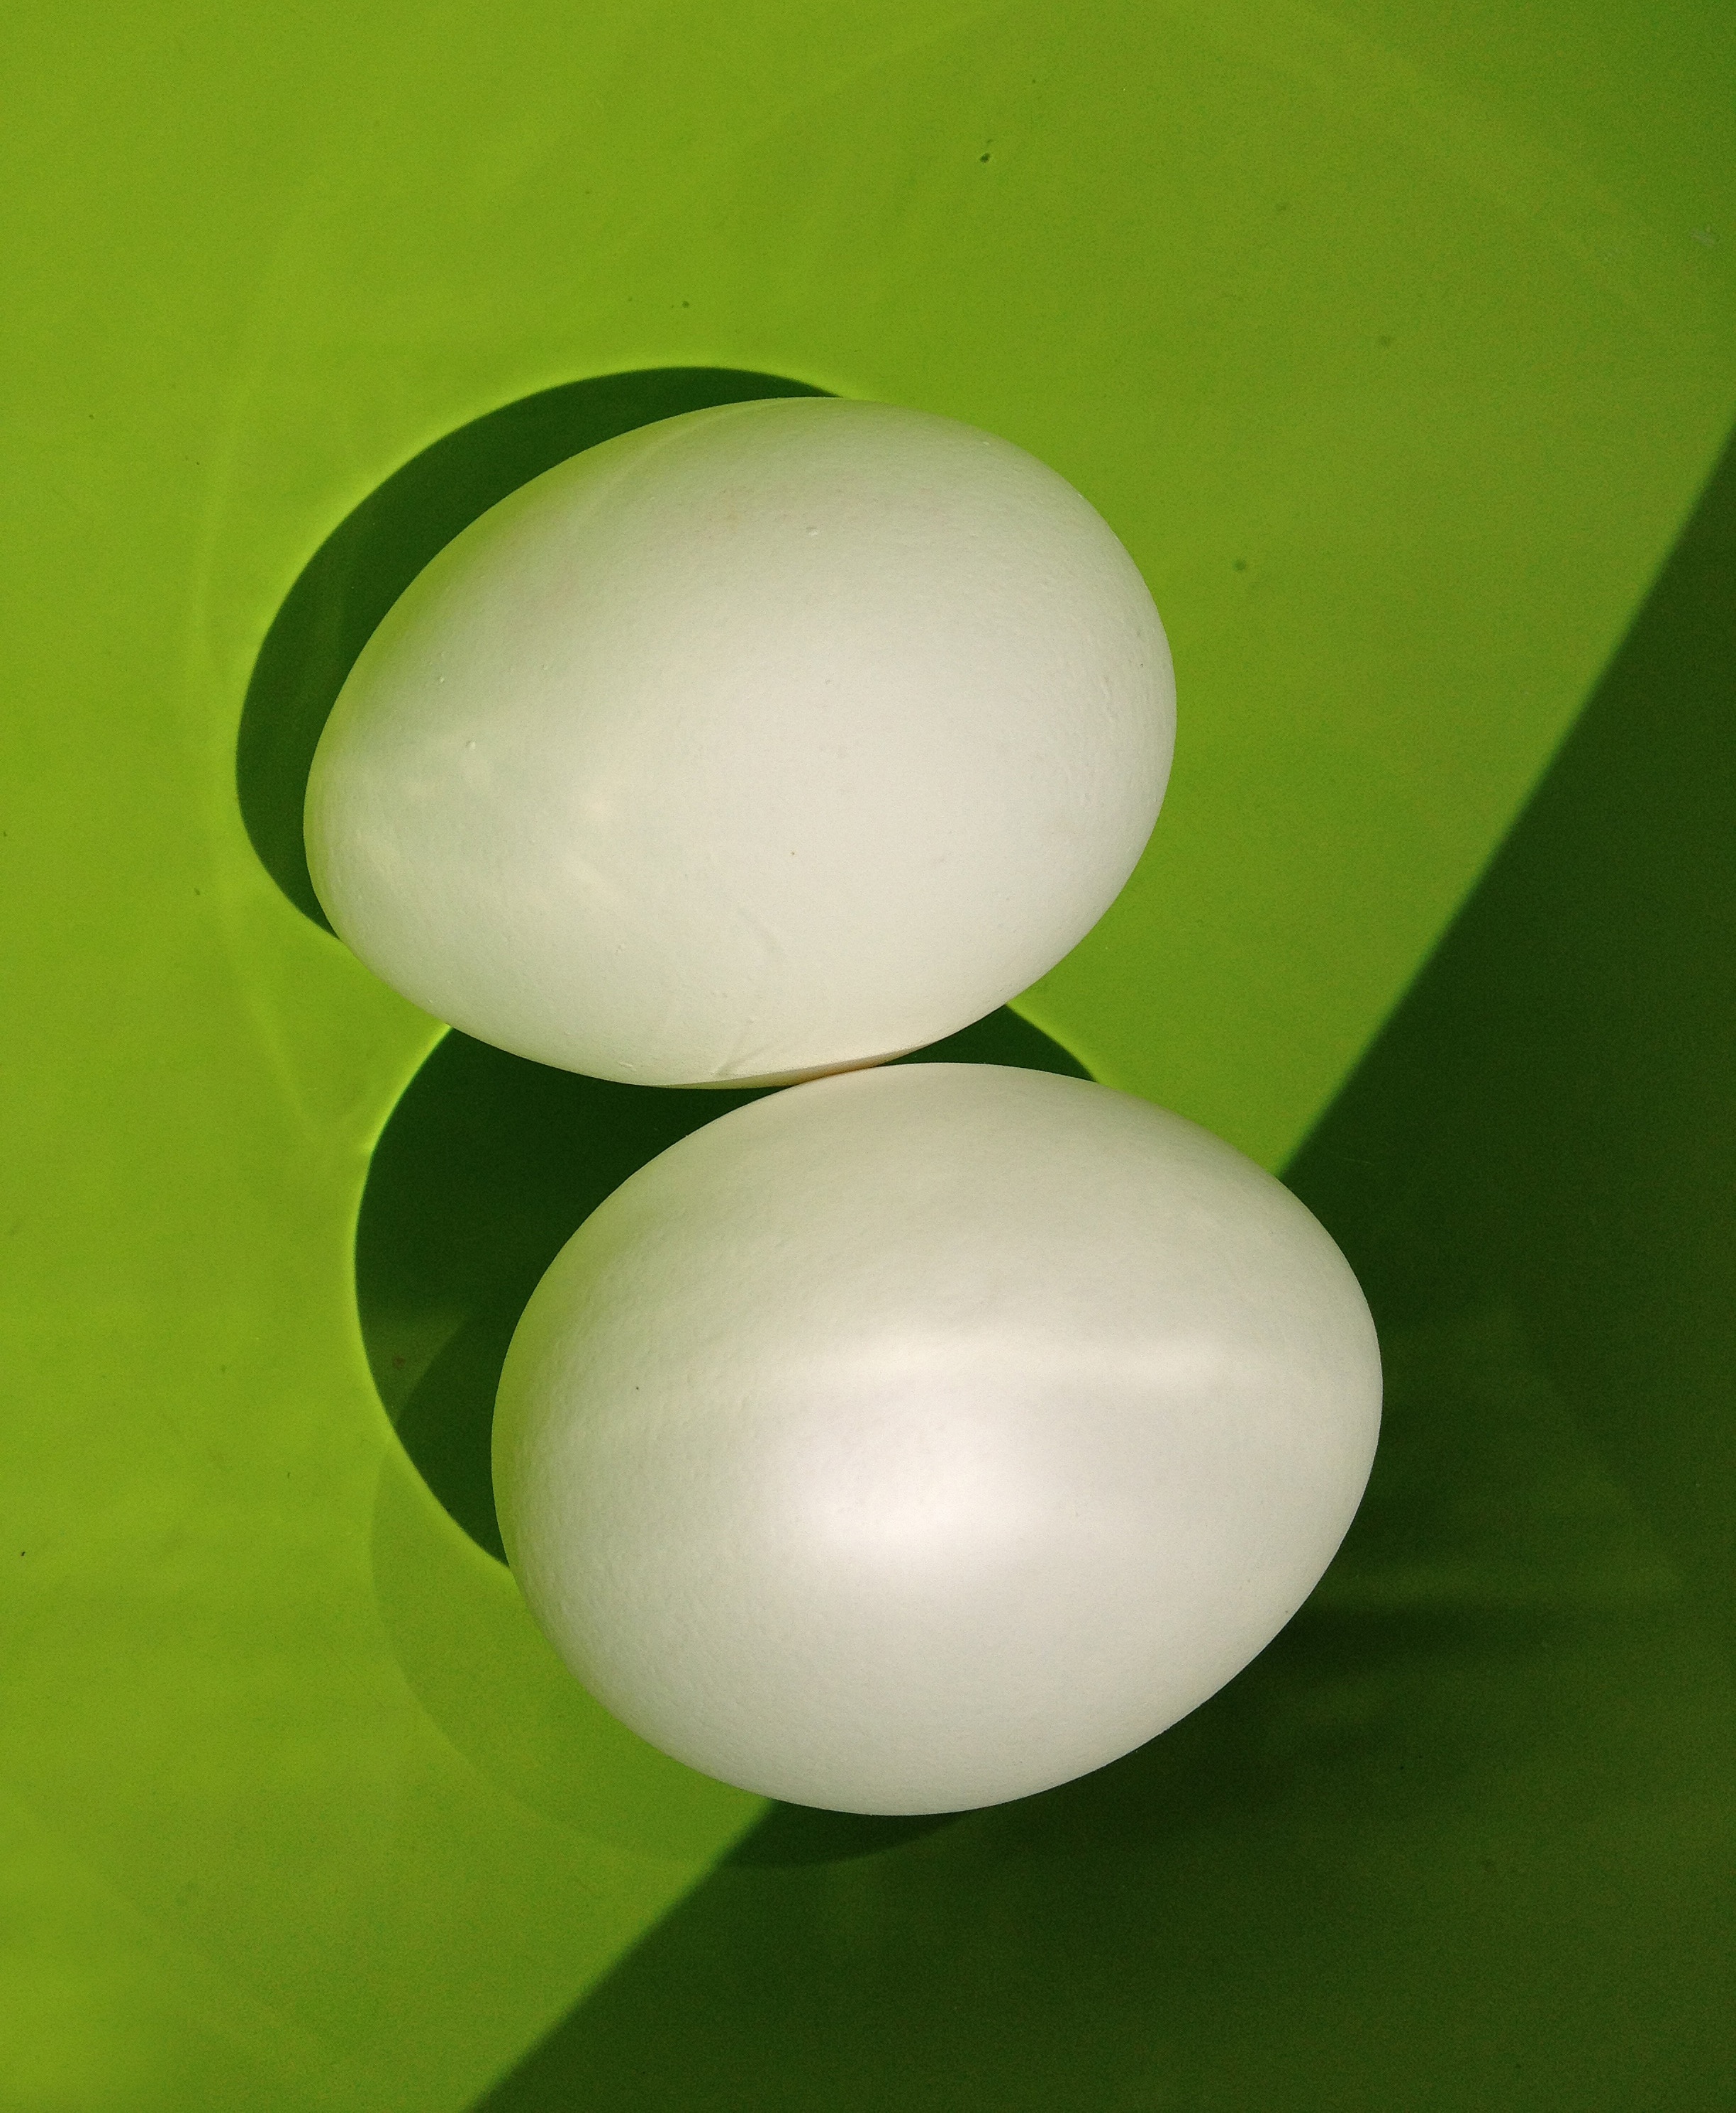 two white eggs on green surface